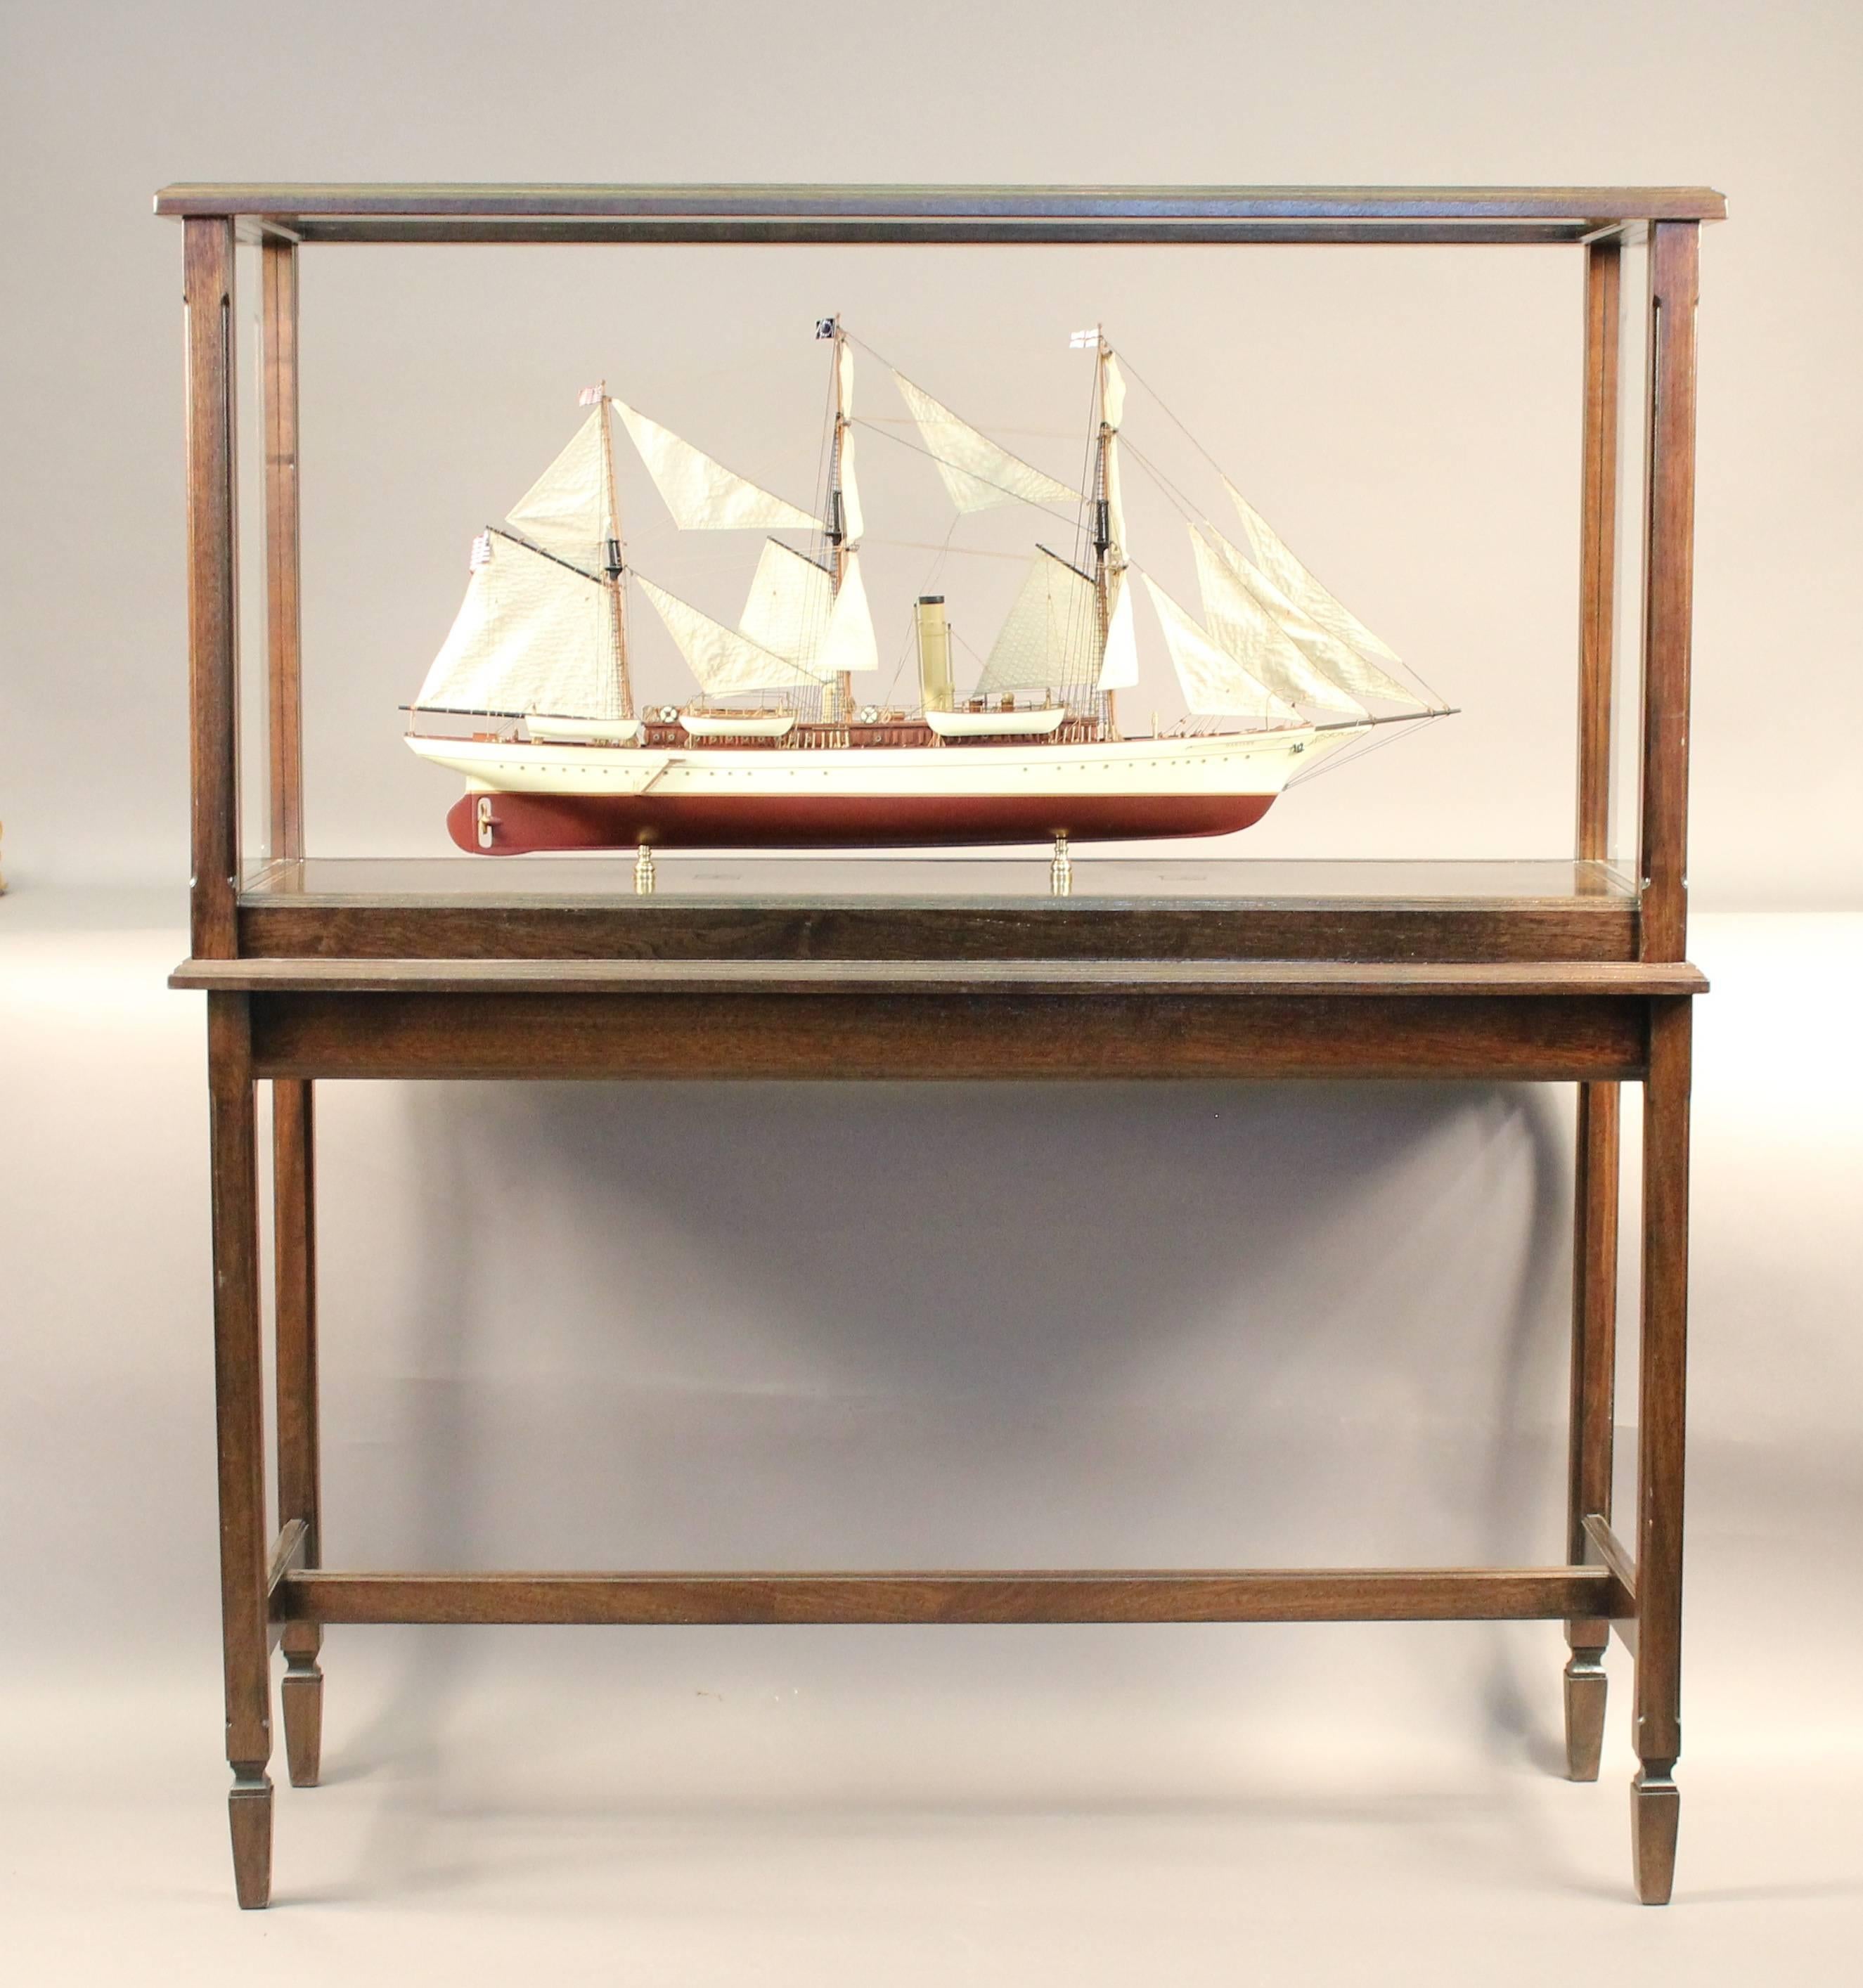 Expertly crafted model of George Baker's private steam yacht "Harvard". Baker founded the Harvard Business School in Cambridge and the Baker Library at Harvard University is named in his honor. The model has mahogany cabins with raised